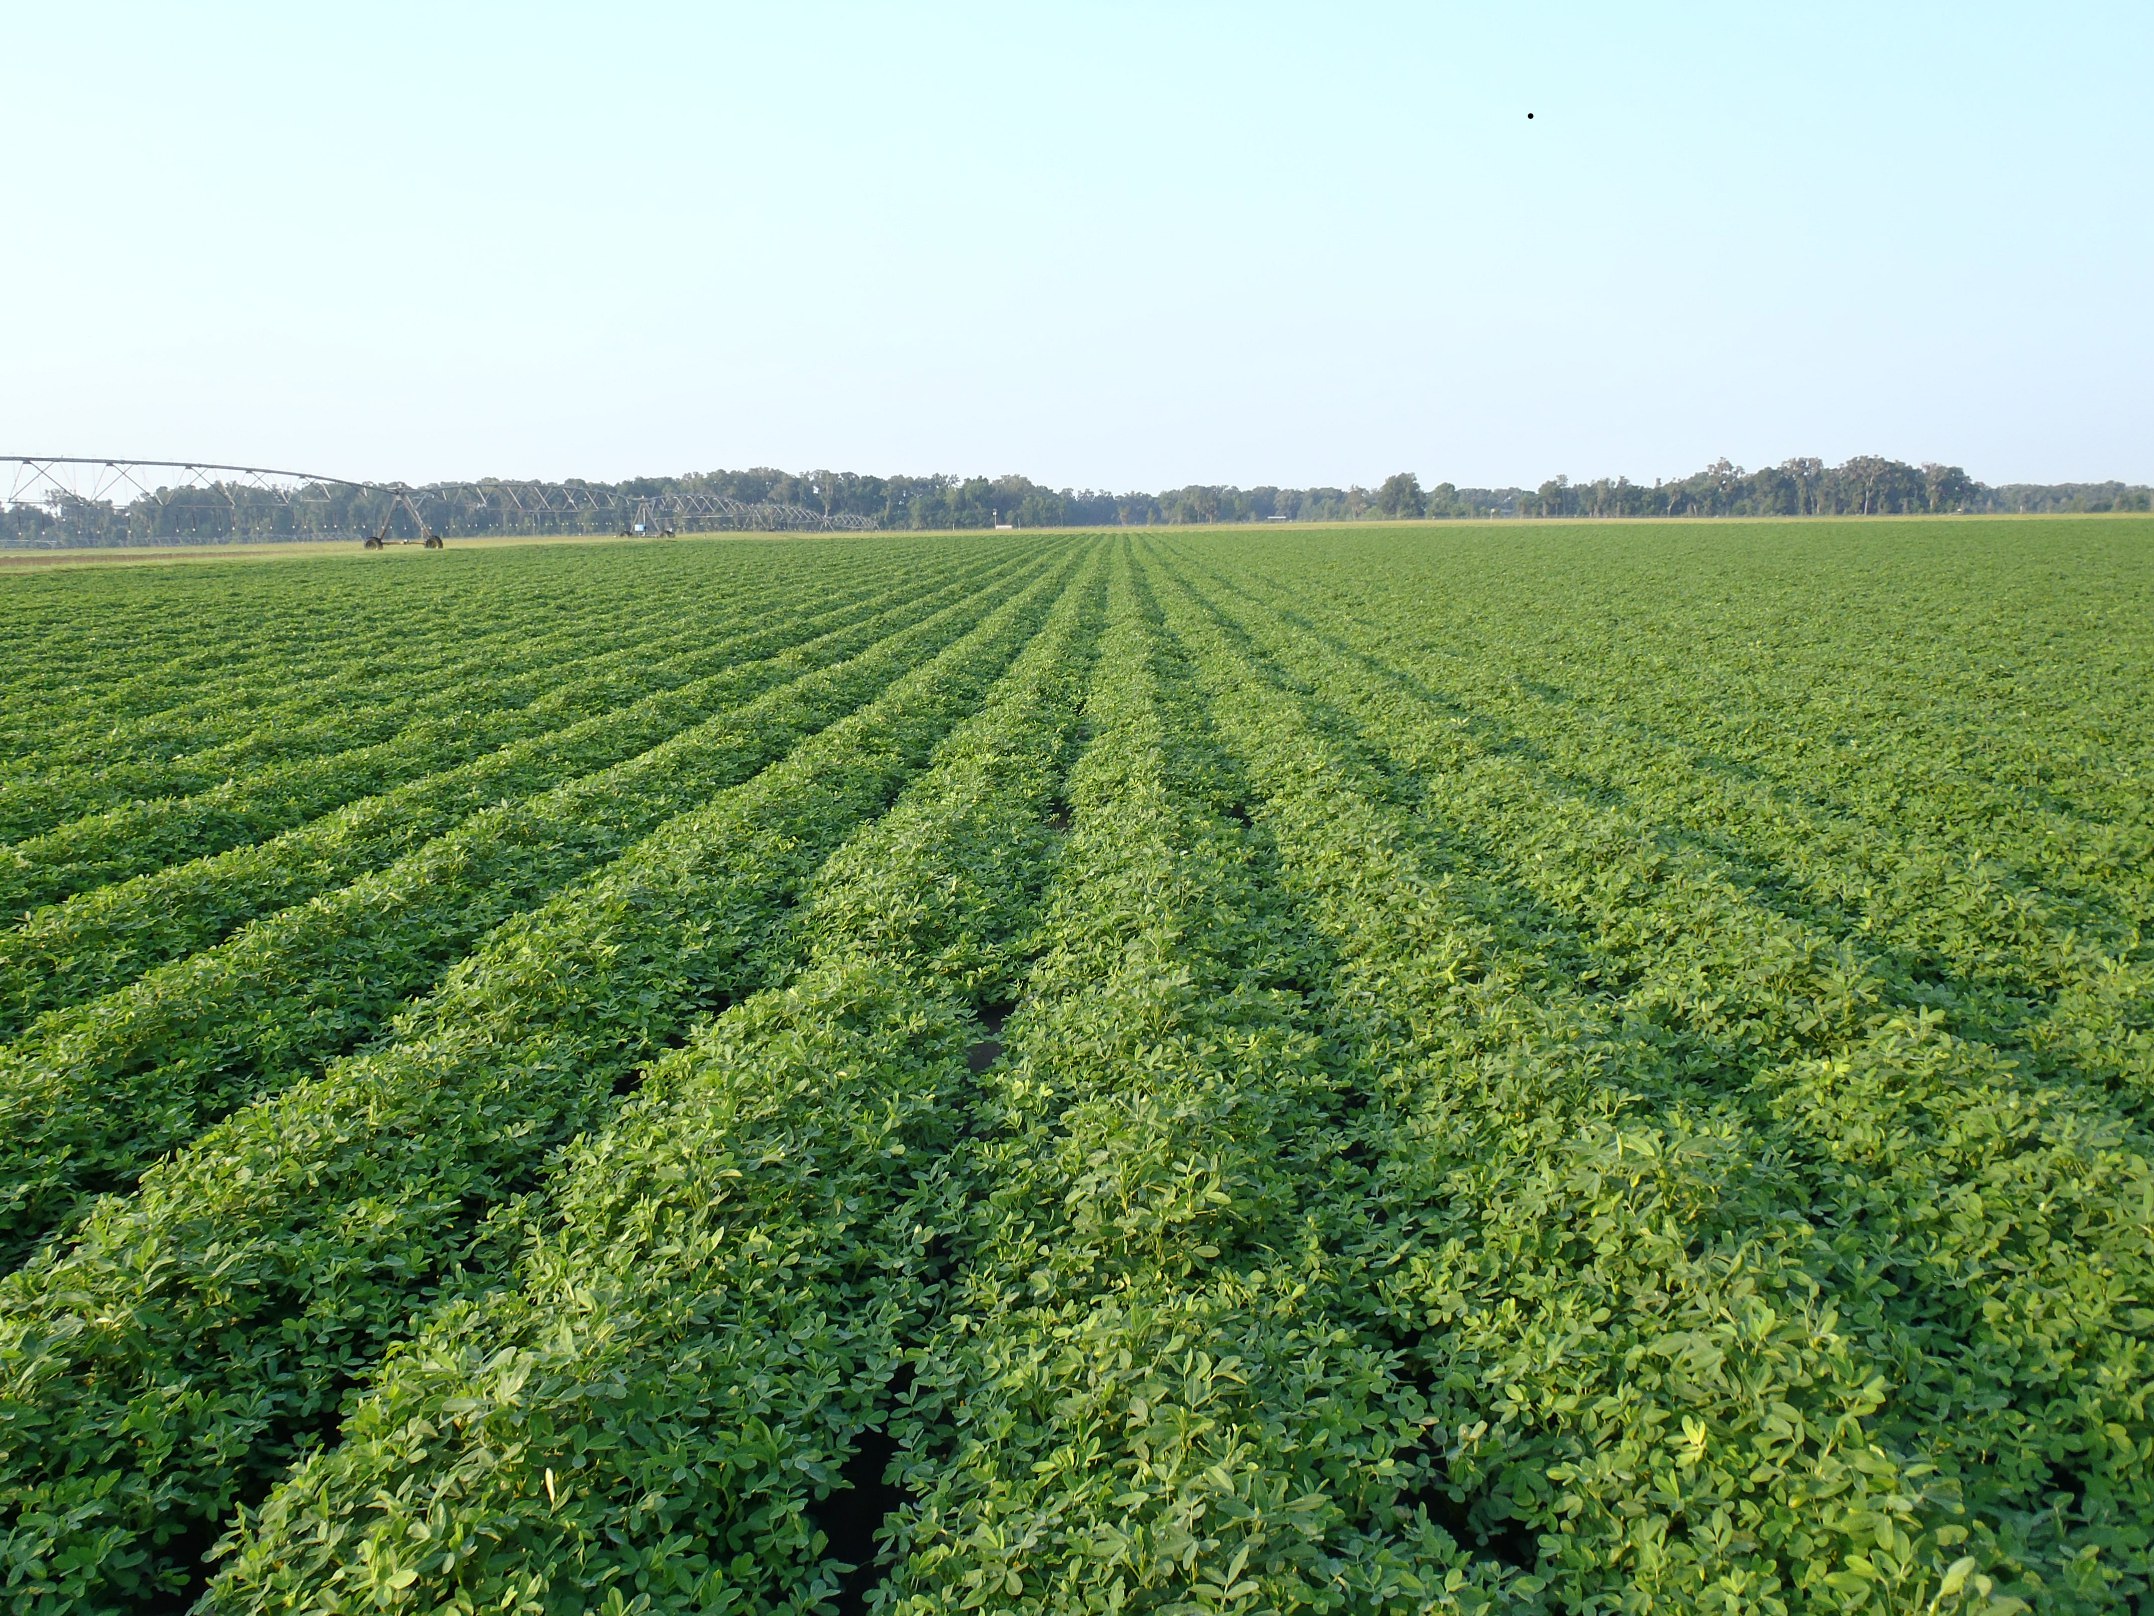 Field of green peanuts with irrigation